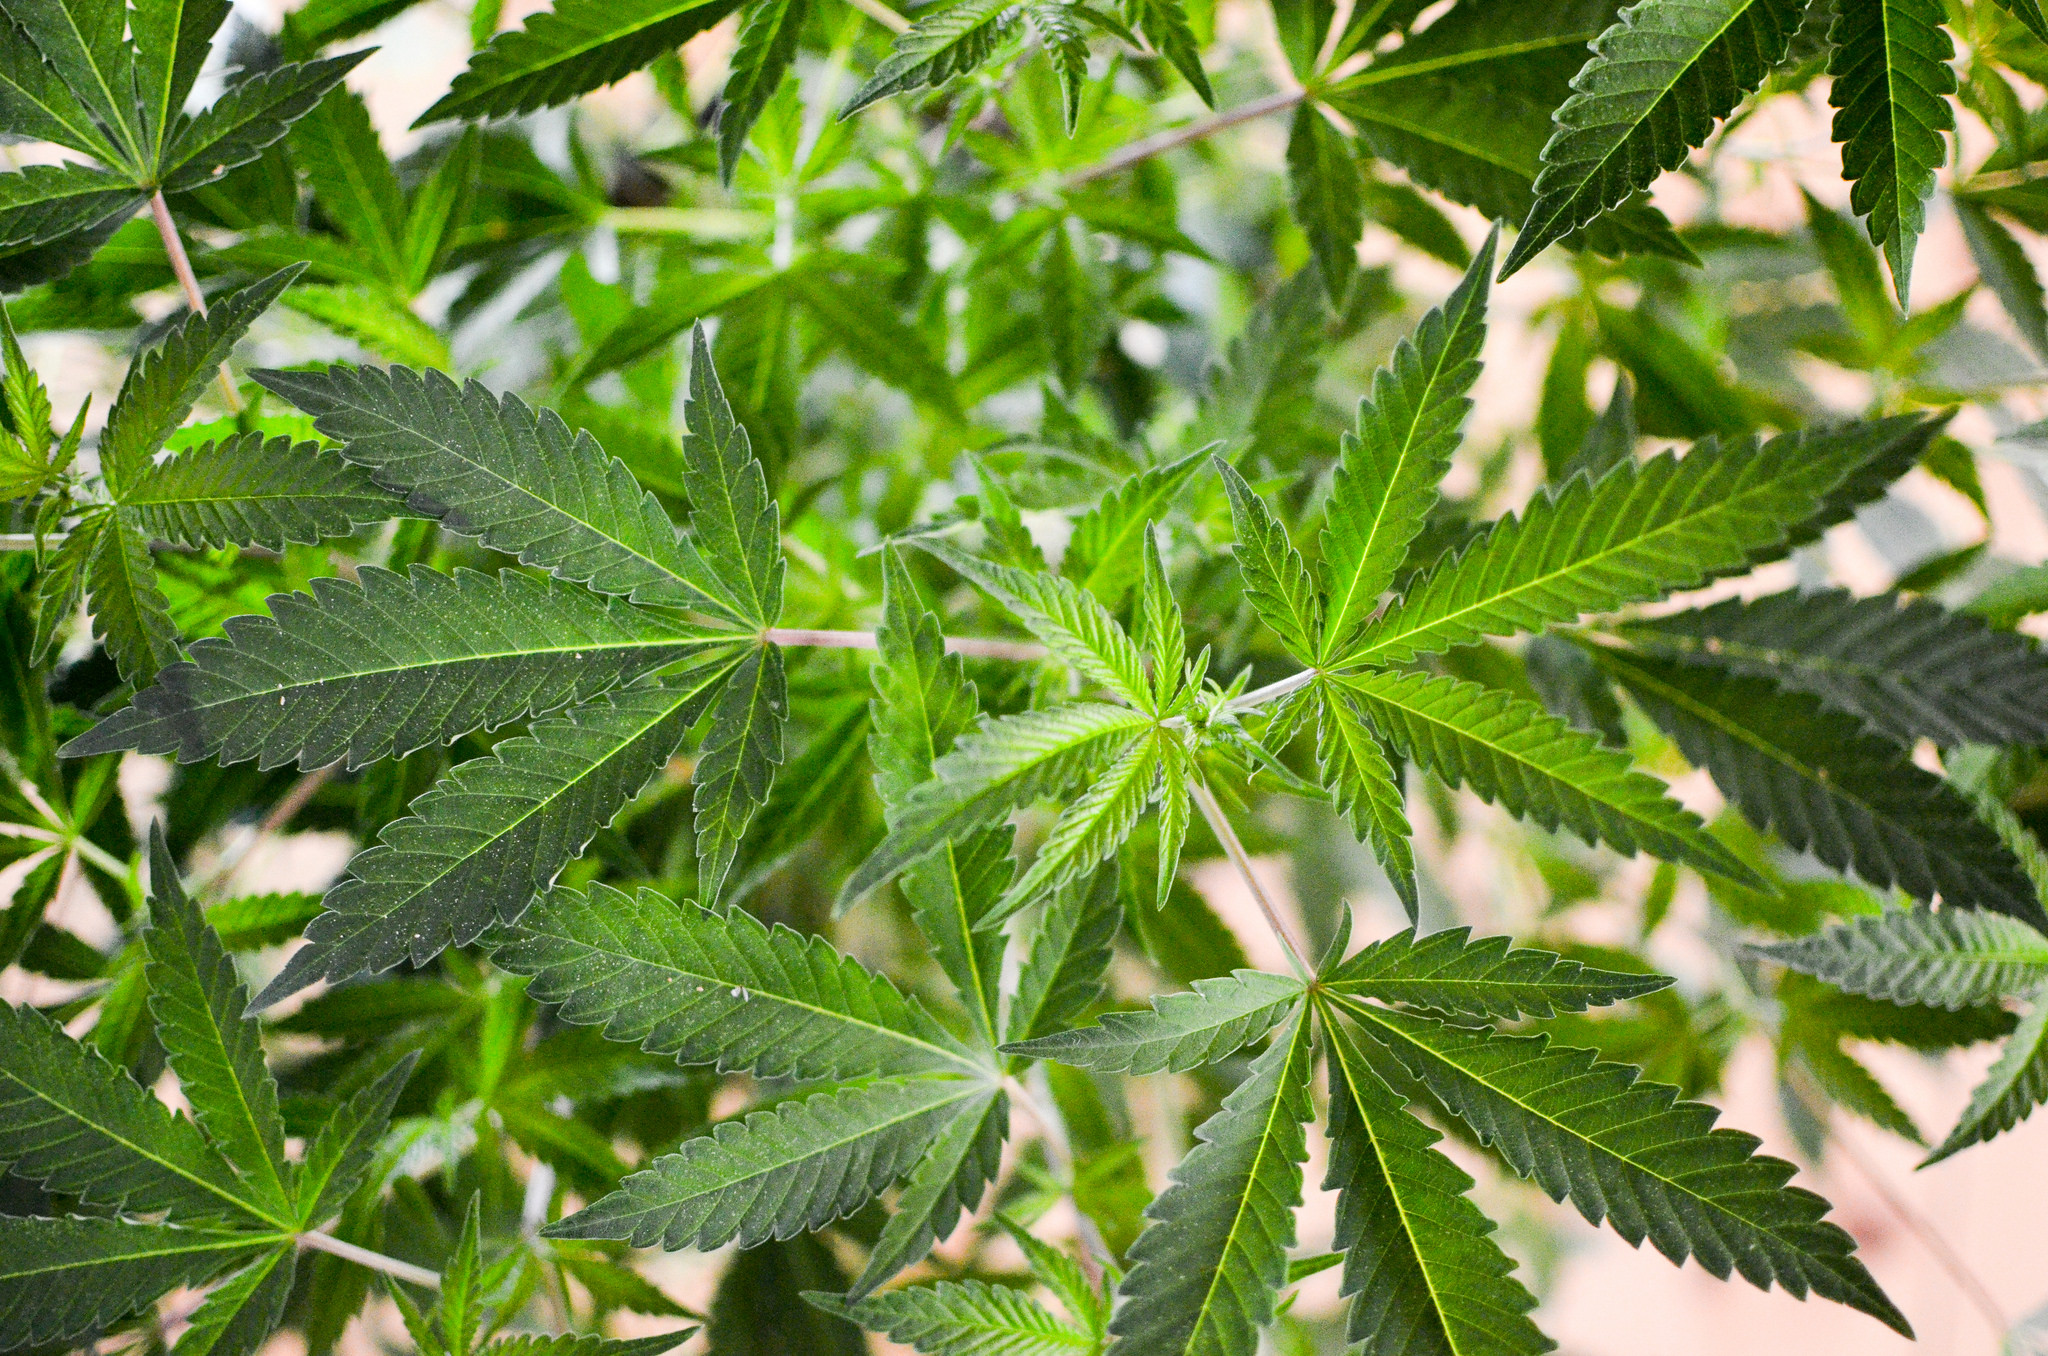 U.S. Government Supports Removing Marijuana From Strictest Global Drug Schedule